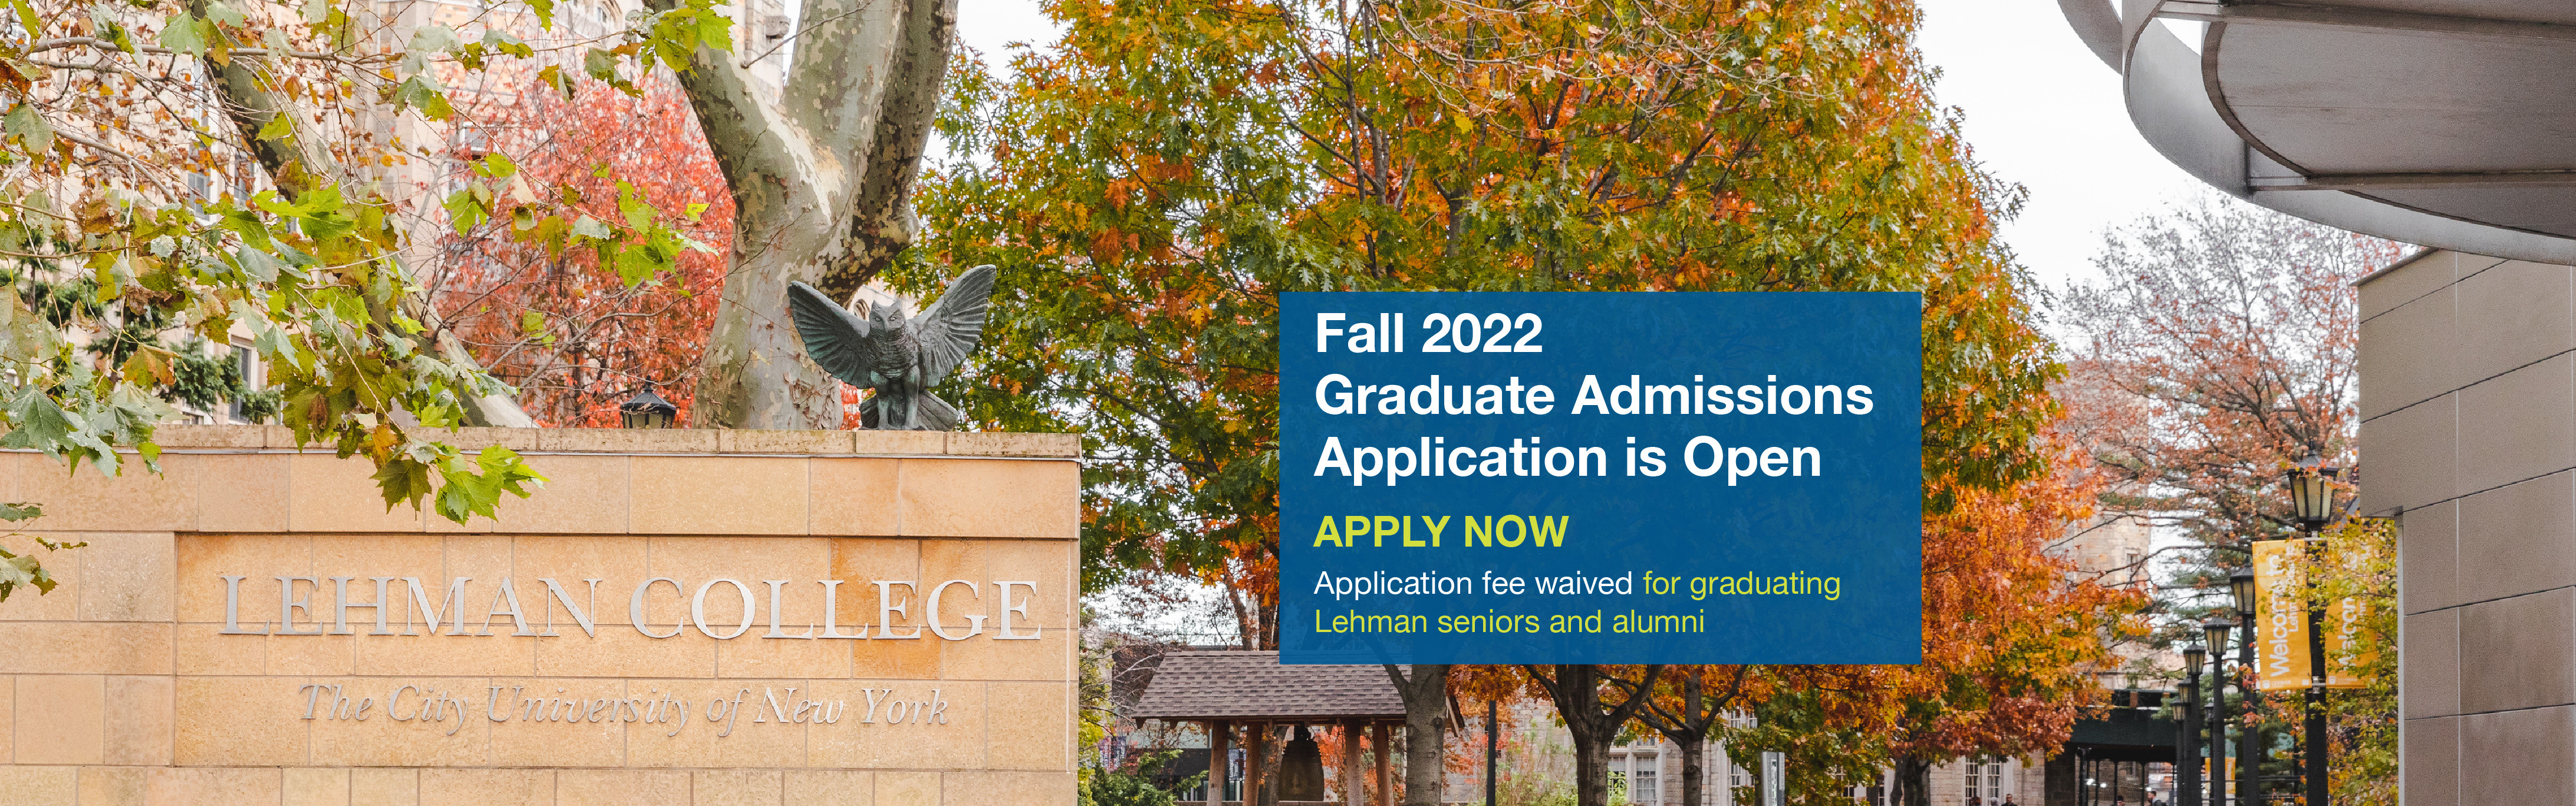 Fall 2022 Graduate Admissions Application Open